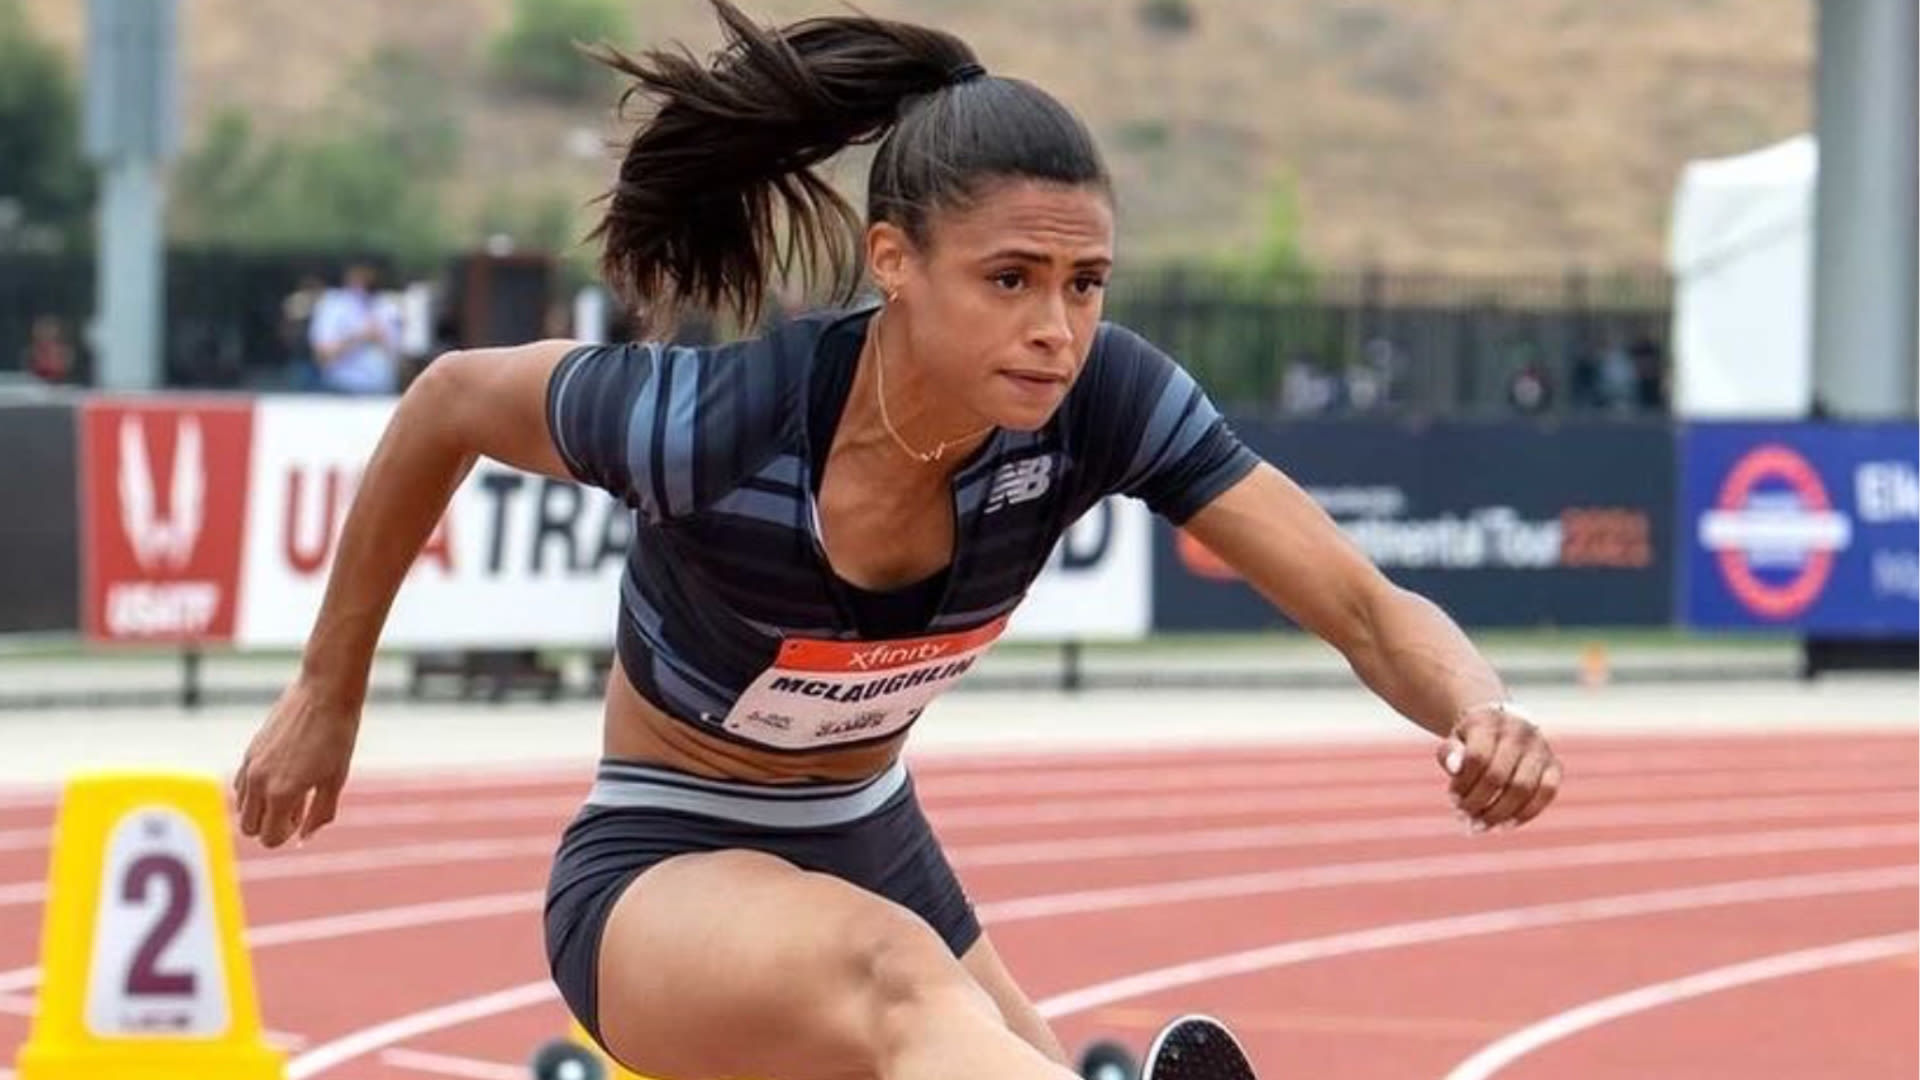 Sydney McLaughlin-Levrone’s 400m hurdles participation has left doubts in the track and field community